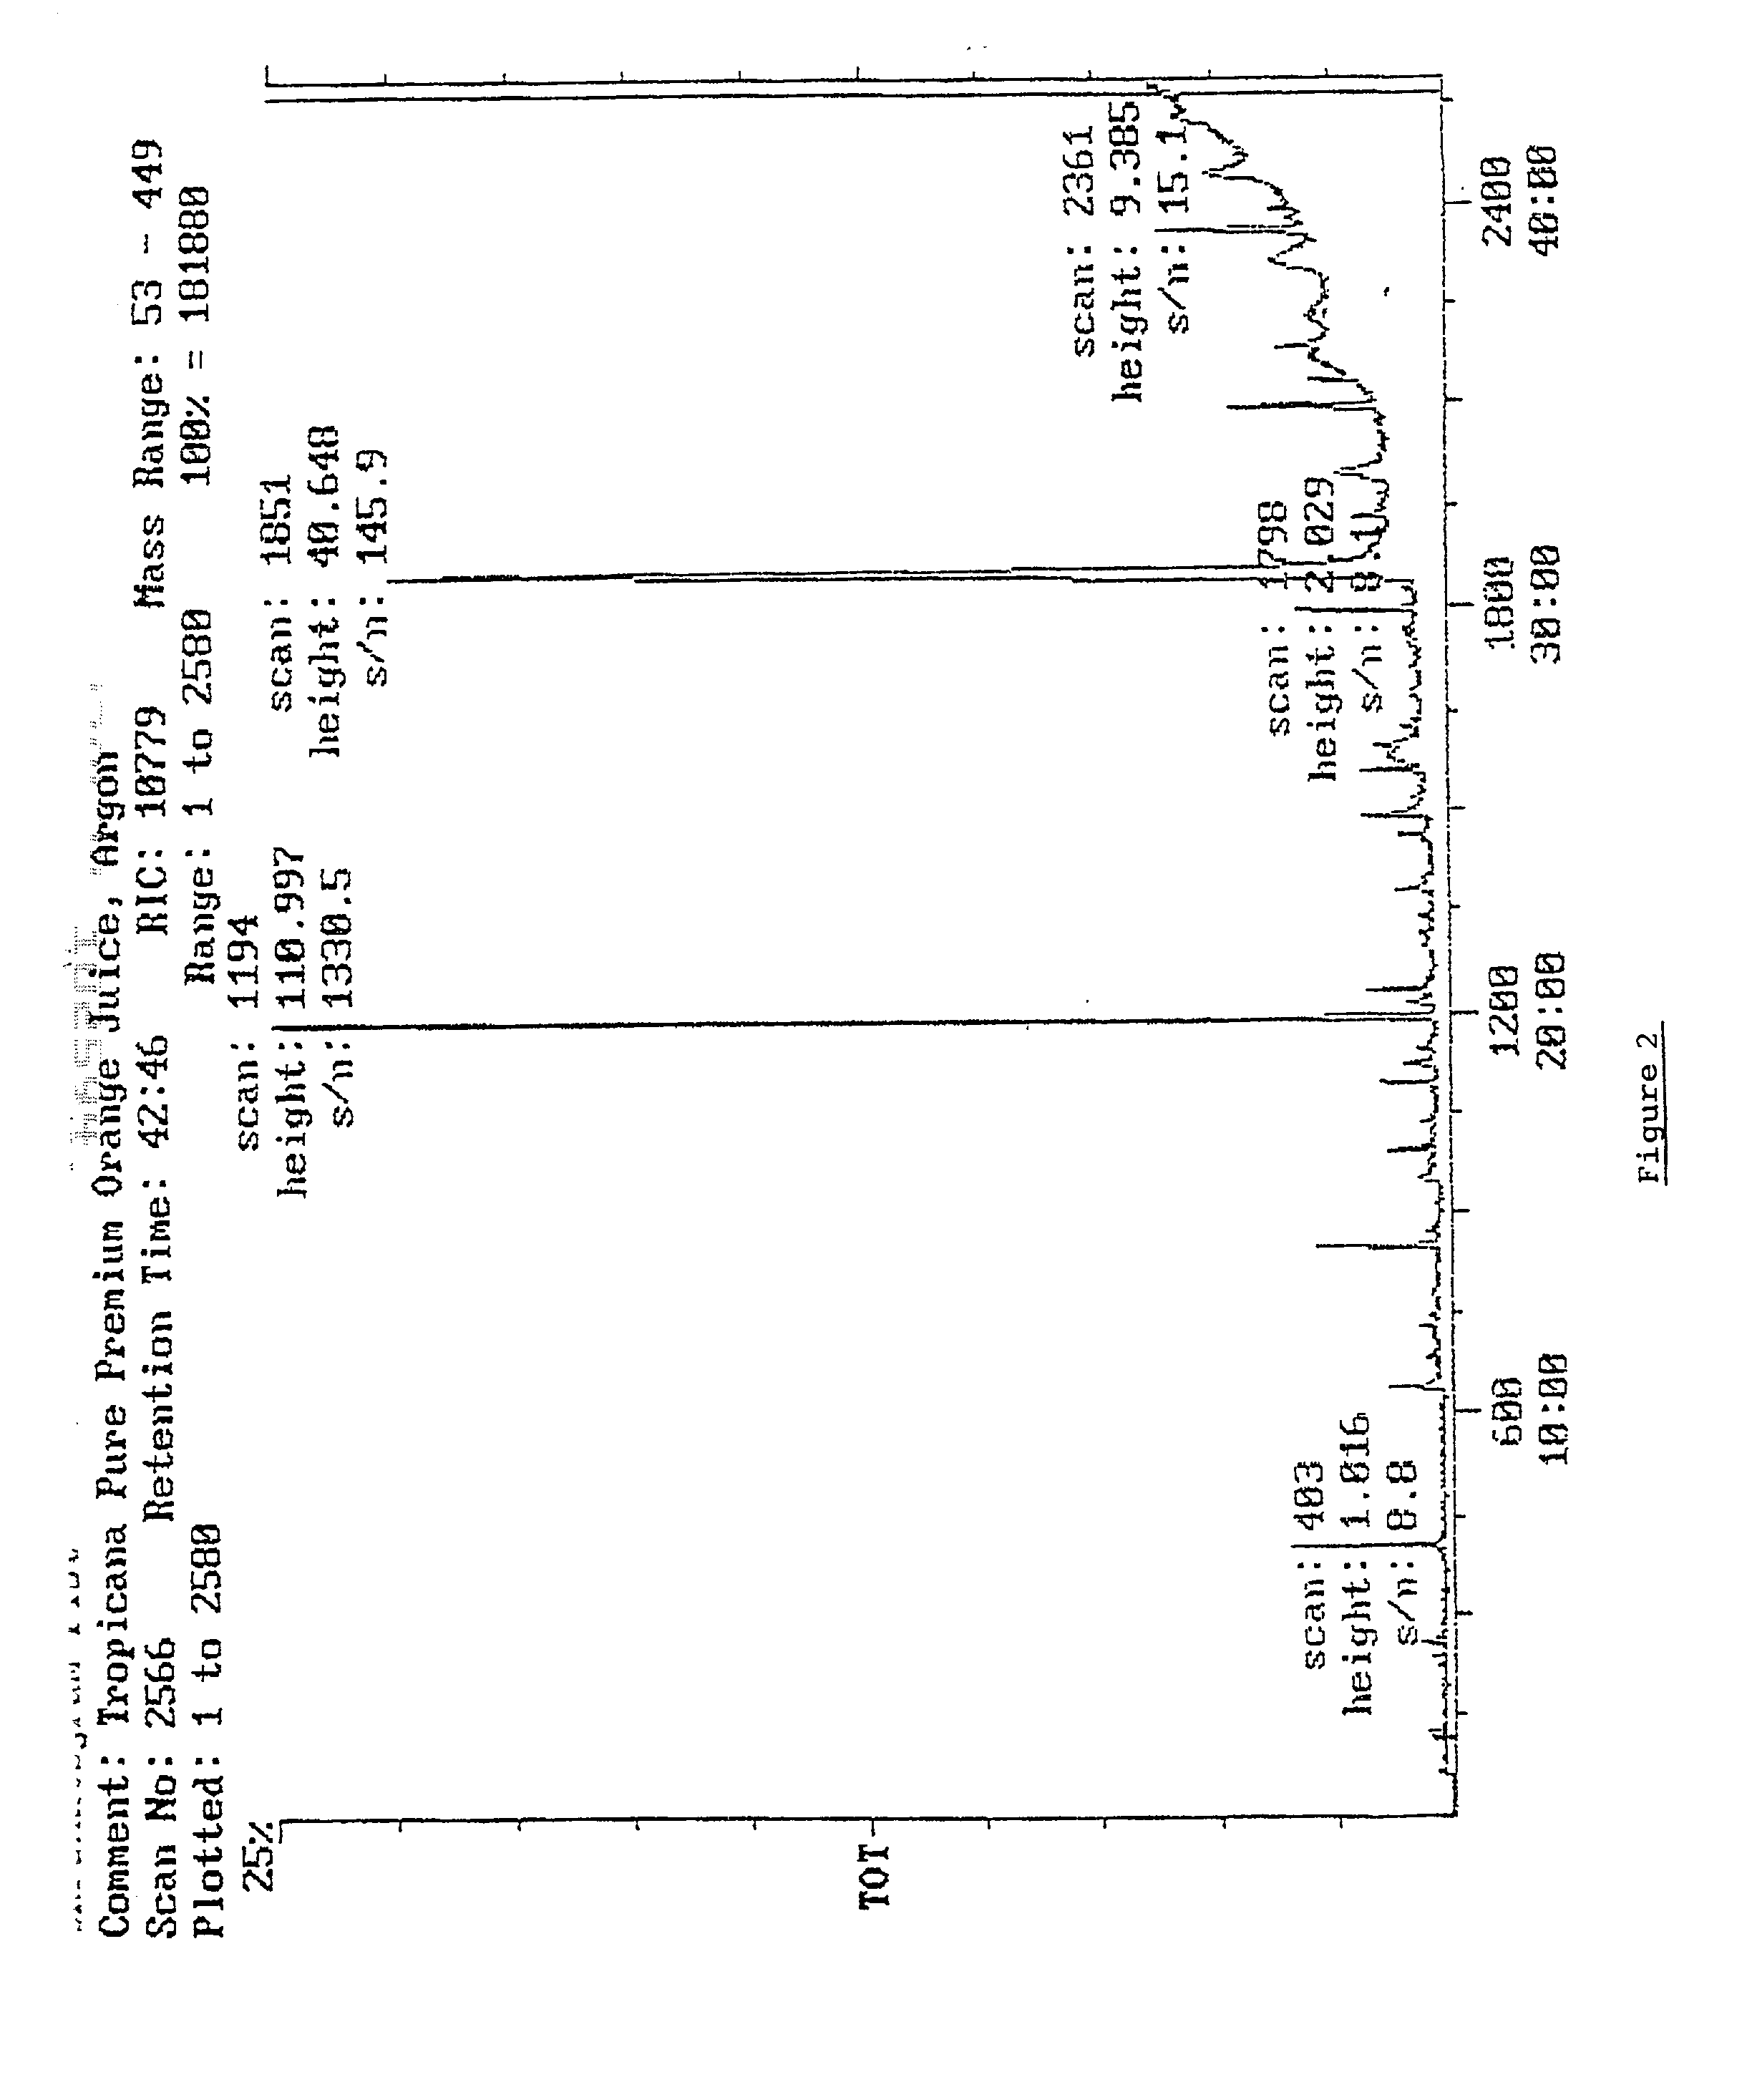 Method of improving processes for manufacturing citrus fruit juice using noble gases